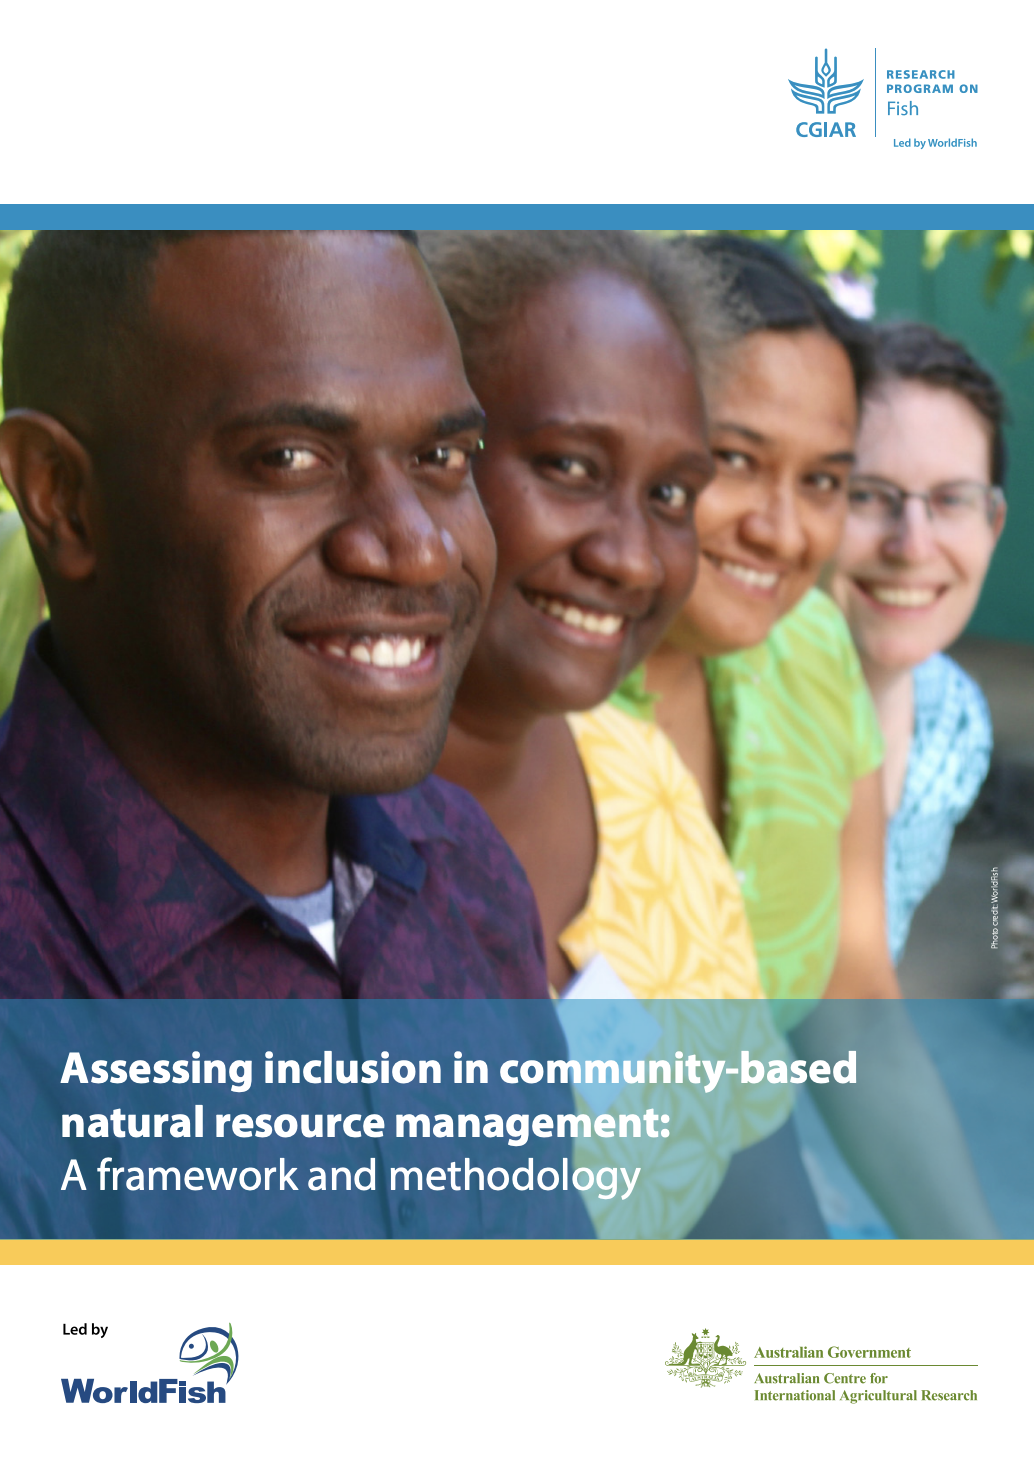 Assessing inclusion in community-based natural resource management: A framework and methodology